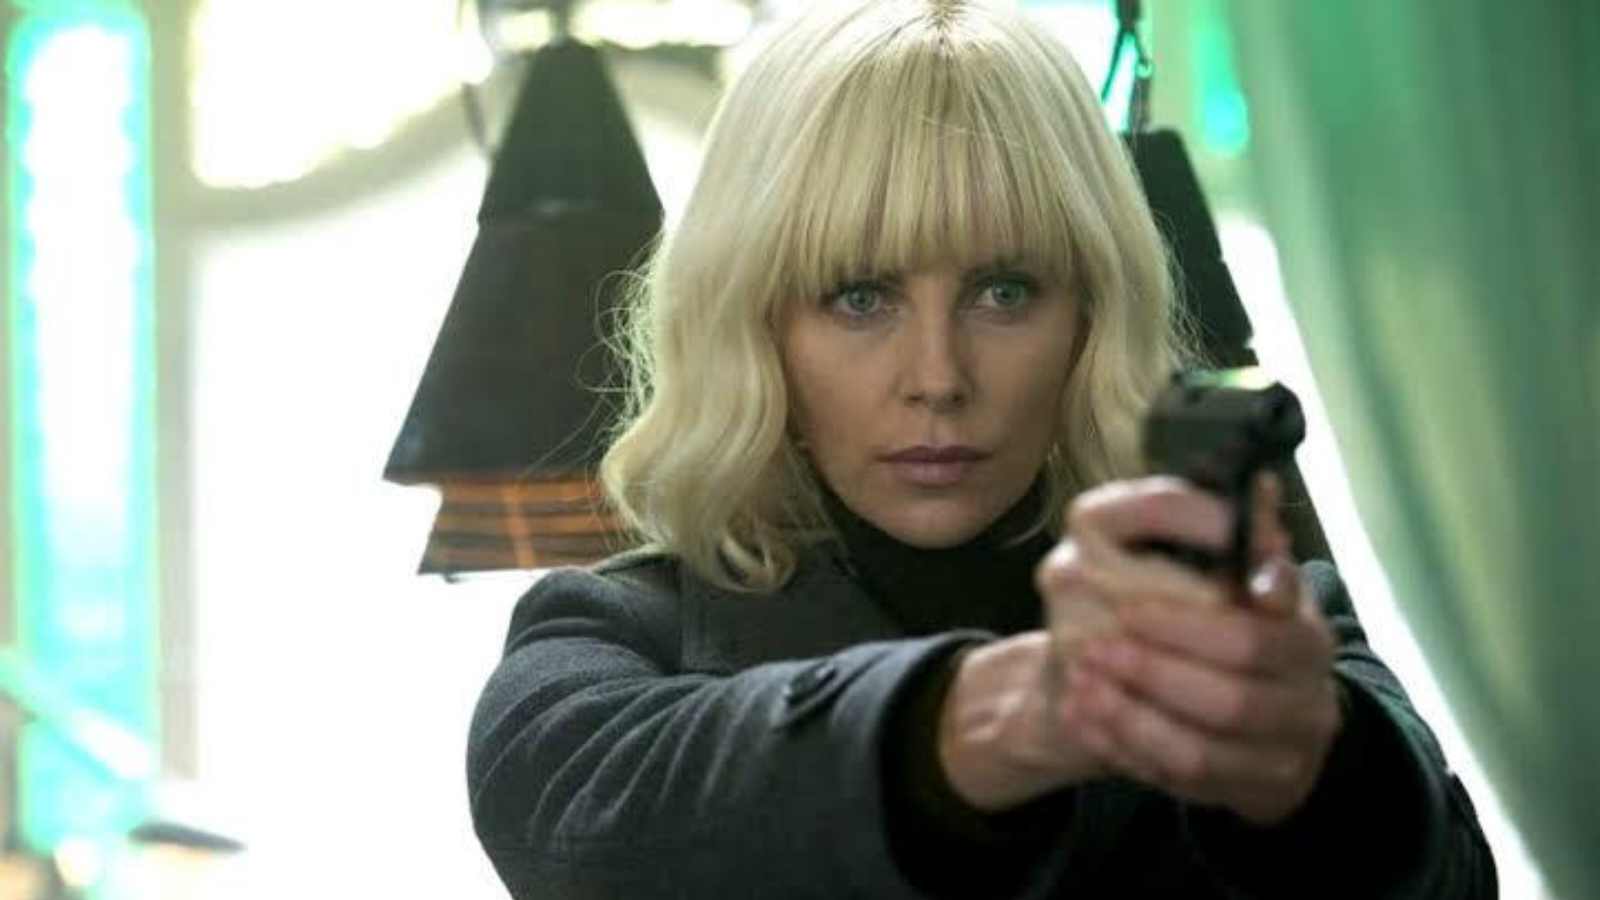 Atomic Blonde 2 will reportedly be released on Netflix